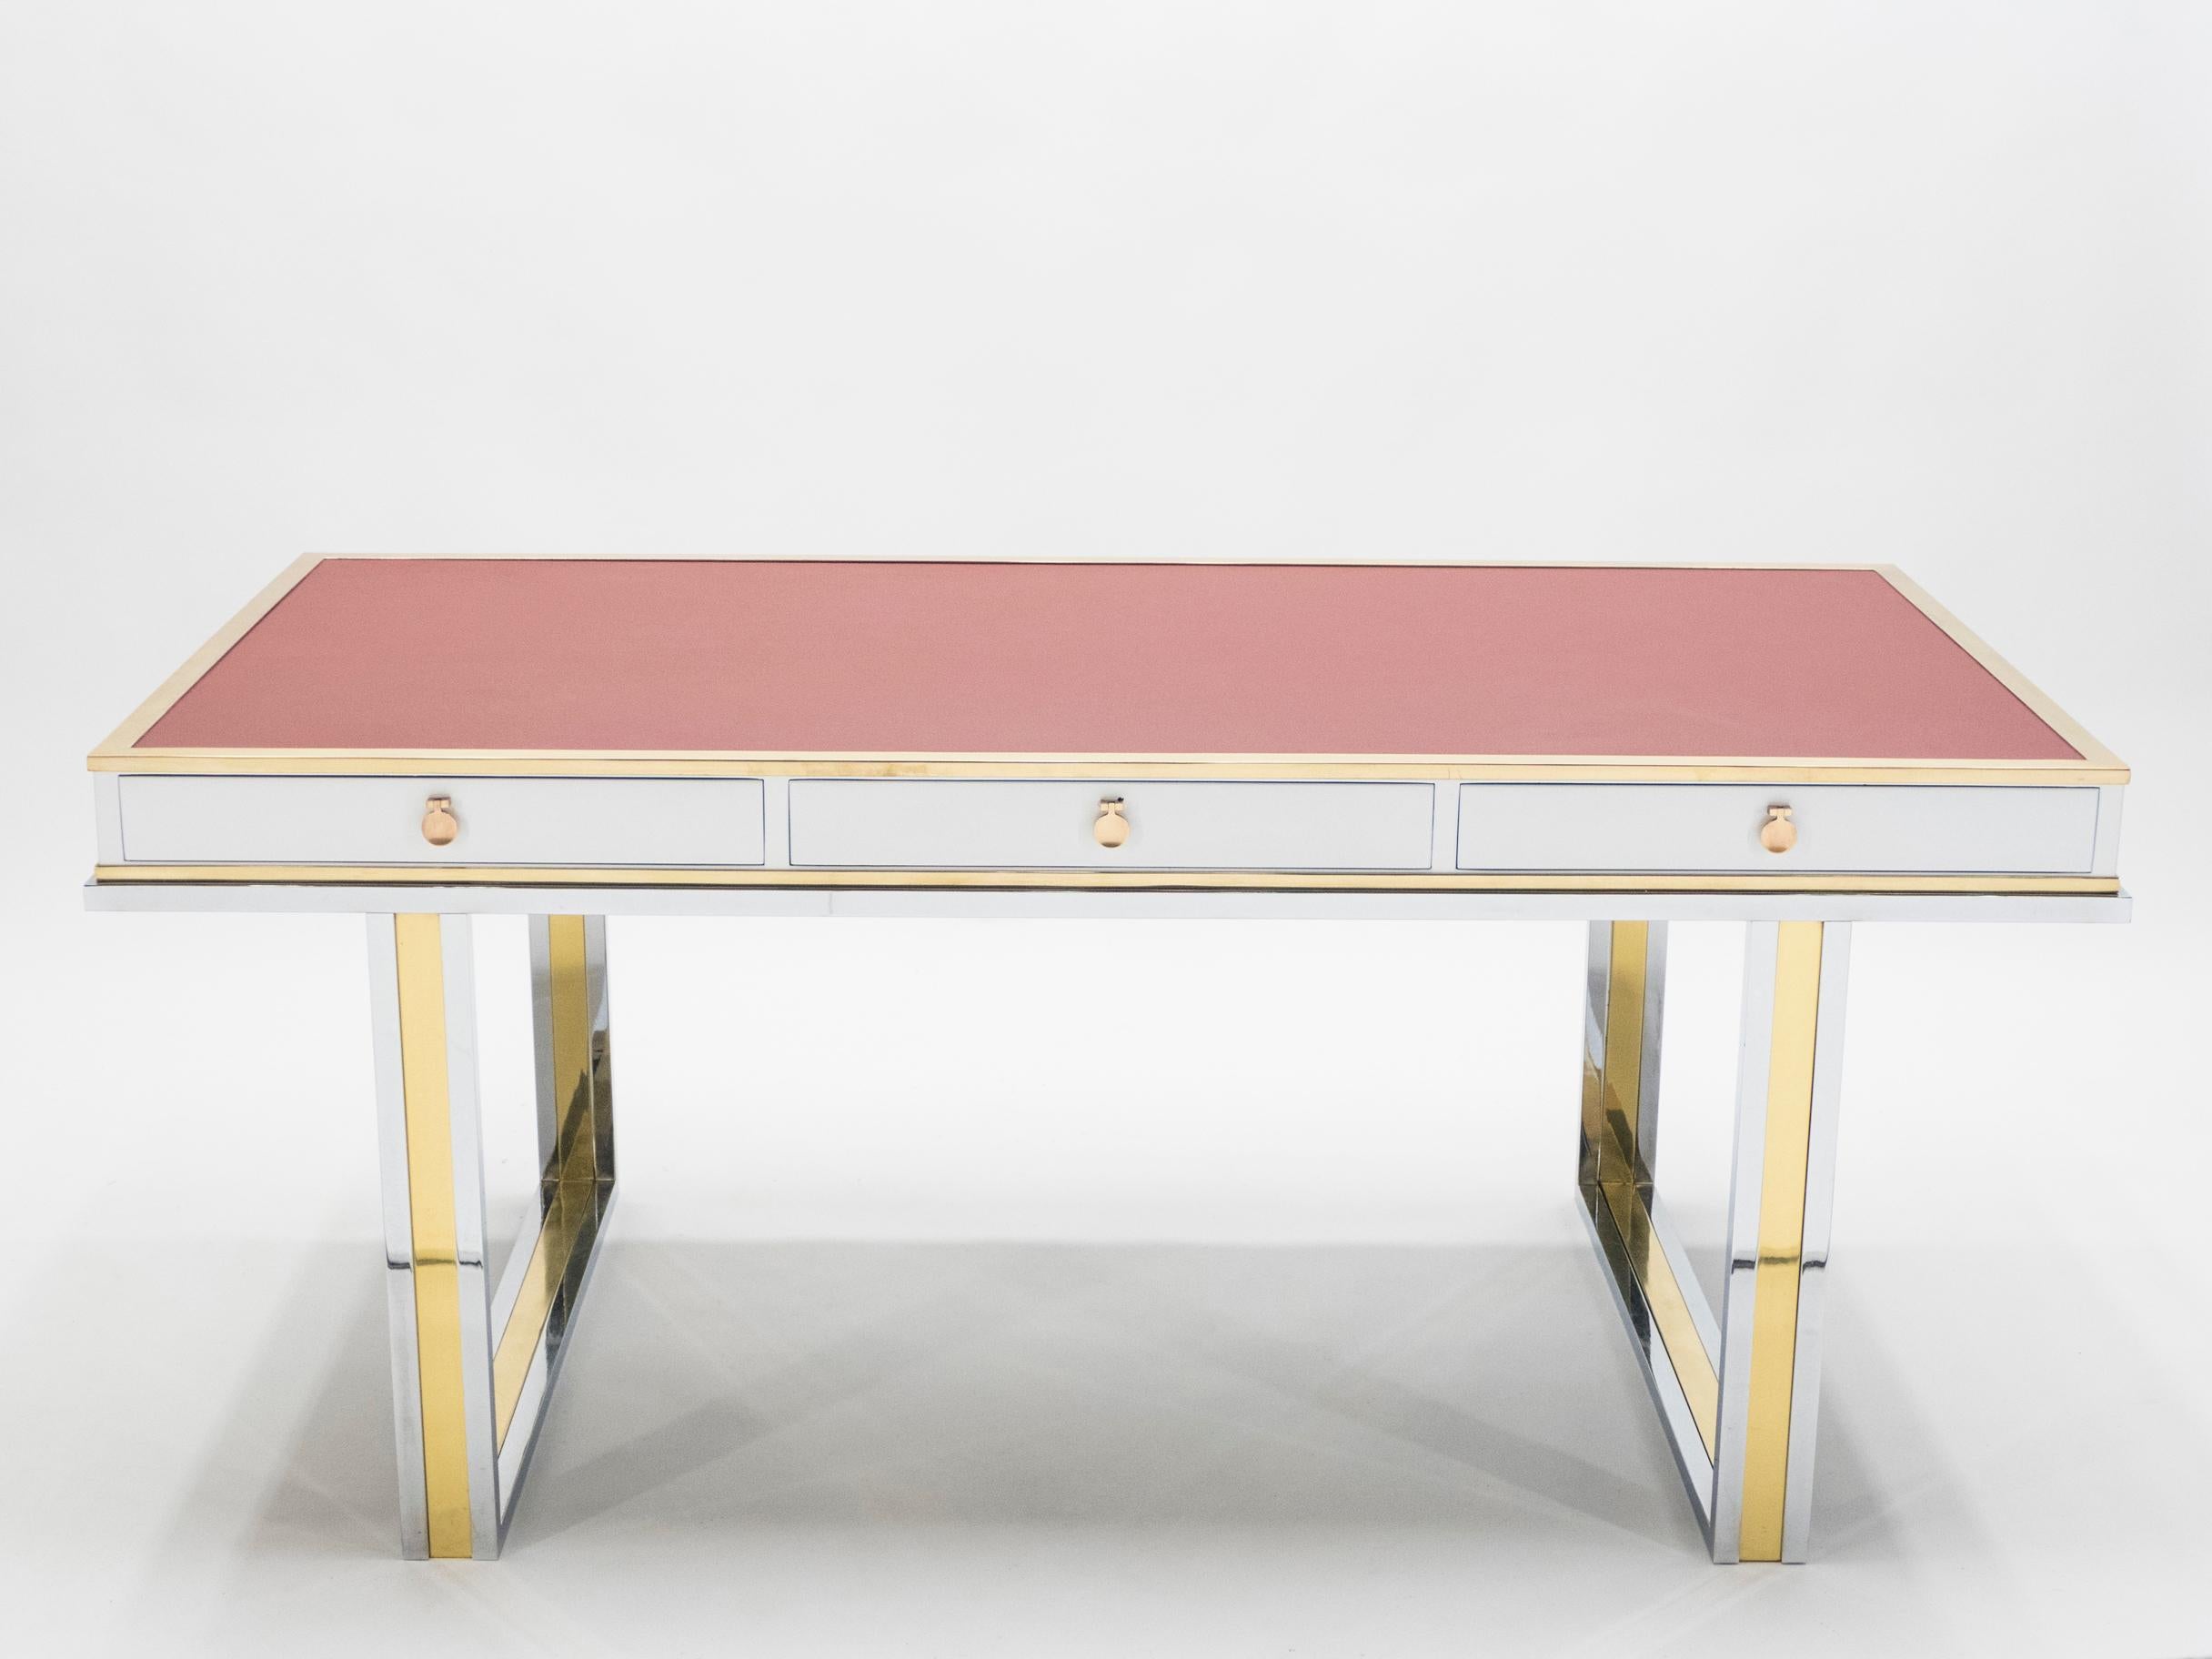 Atelier La Boetie was a confidential interior design studio during the 1970s in France that only made customized pieces commissioned by elite clients. This large desk, made in 1974 for one such client, is an example of the unique design and high